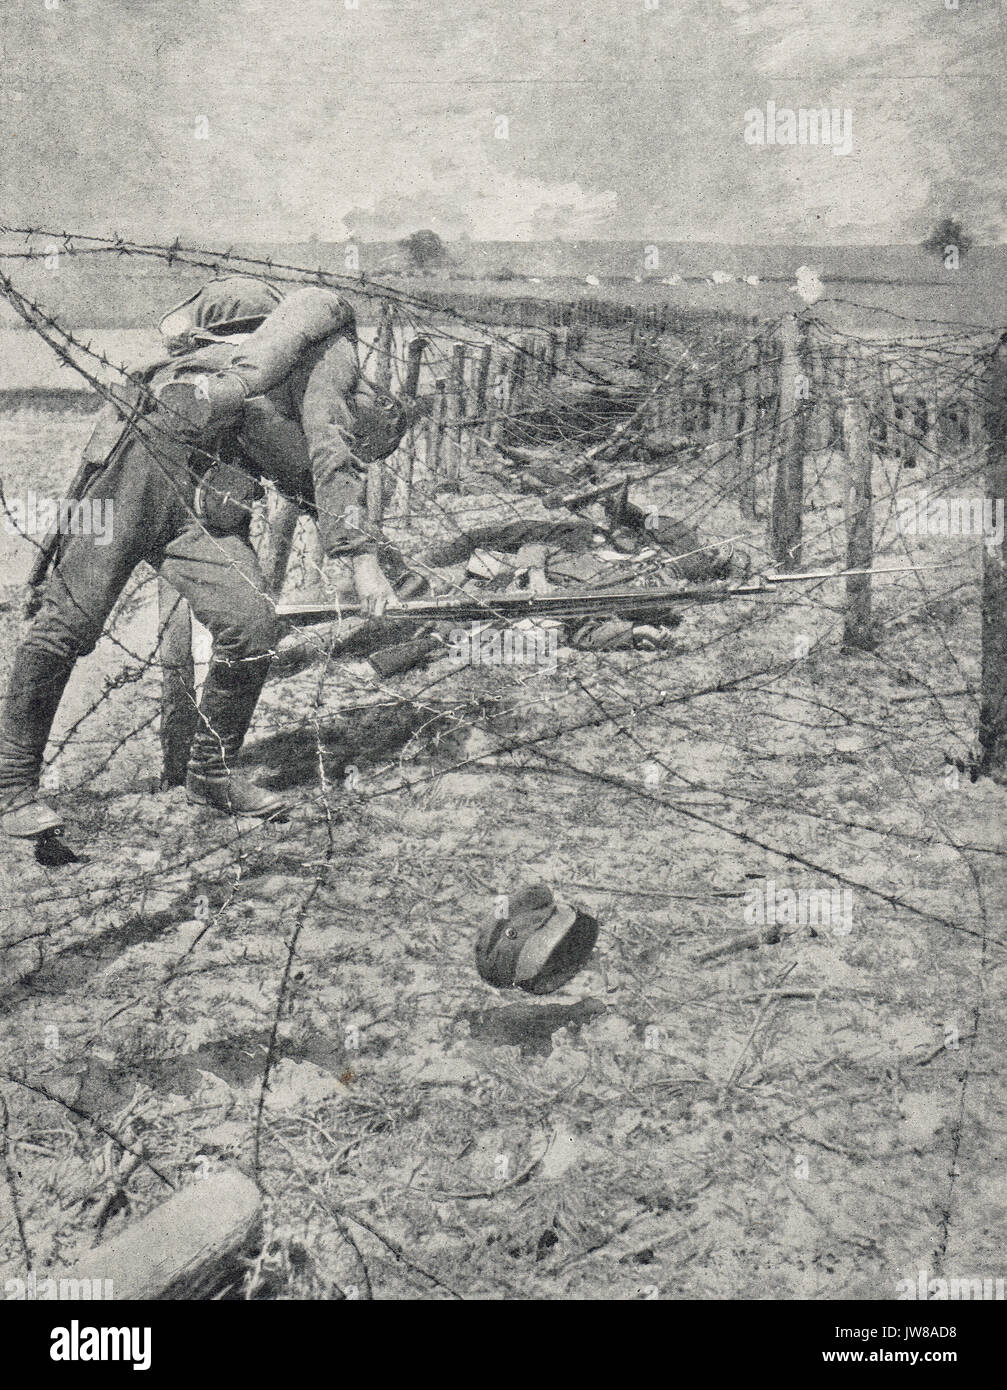 Soldier impaled on barbed wire, WW1 Stock Photo